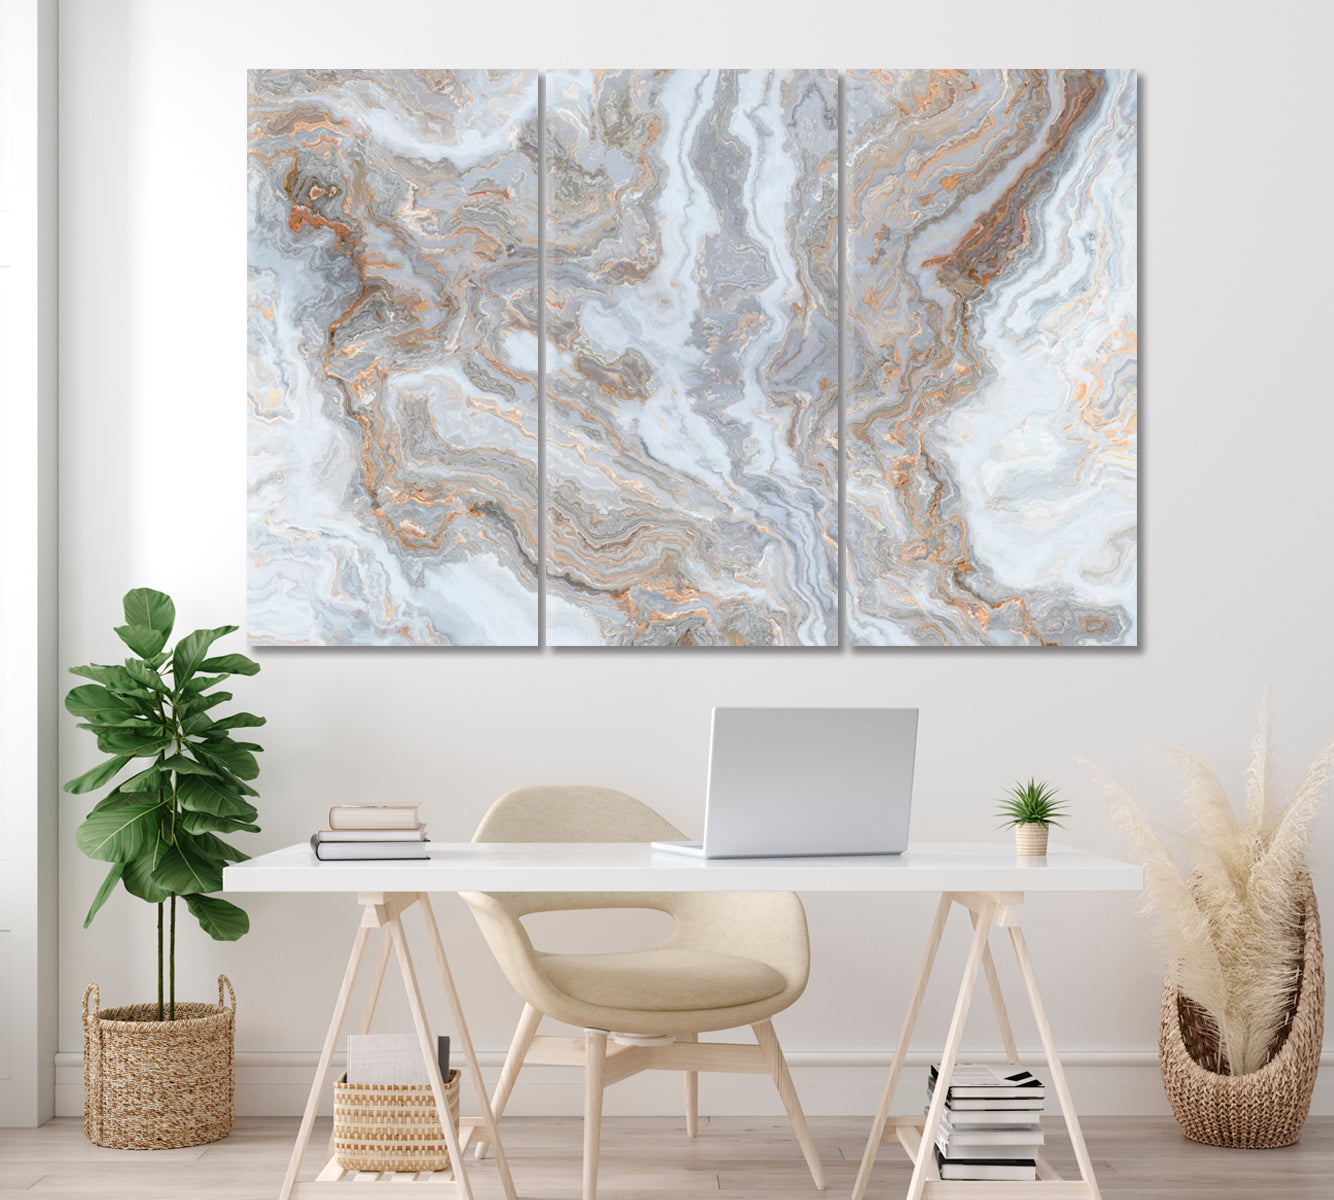 Gray-Beige Marble Canvas Print ArtLexy 3 Panels 36"x24" inches 